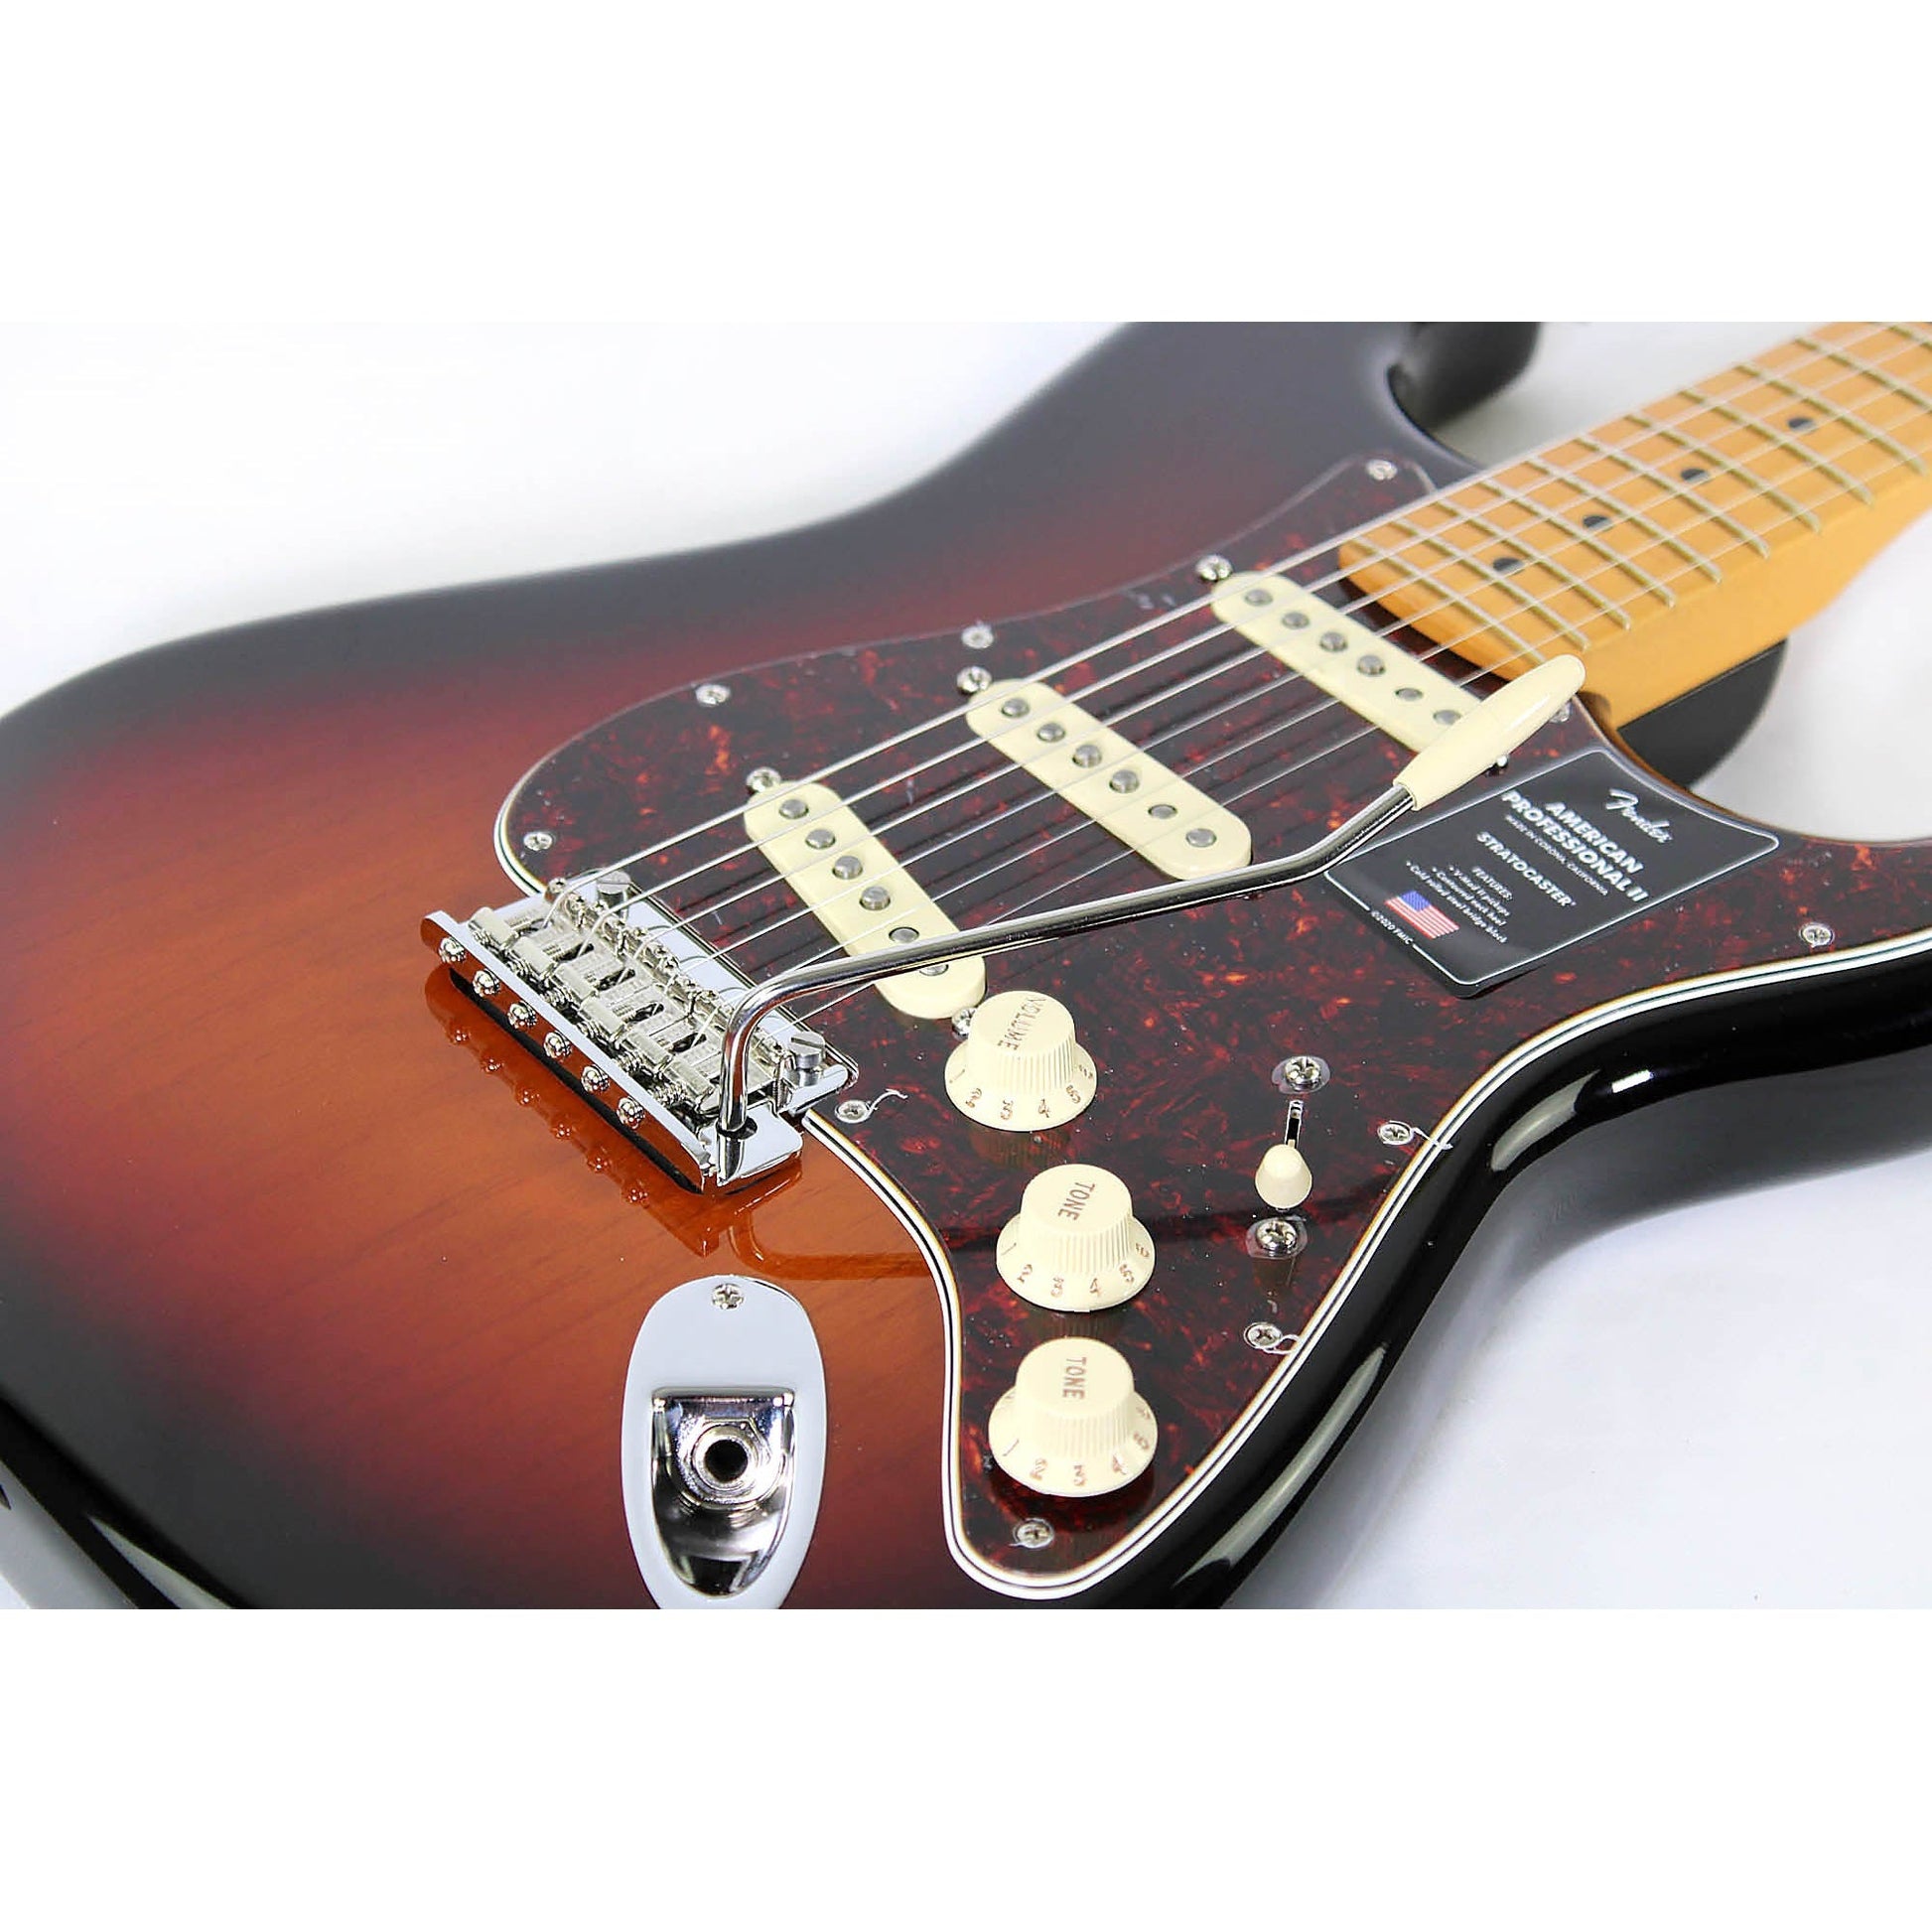 Fender American Professional II Stratocaster - 3 Color Sunburst with Maple Fingerboard - Leitz Music-885978598755-0113902700